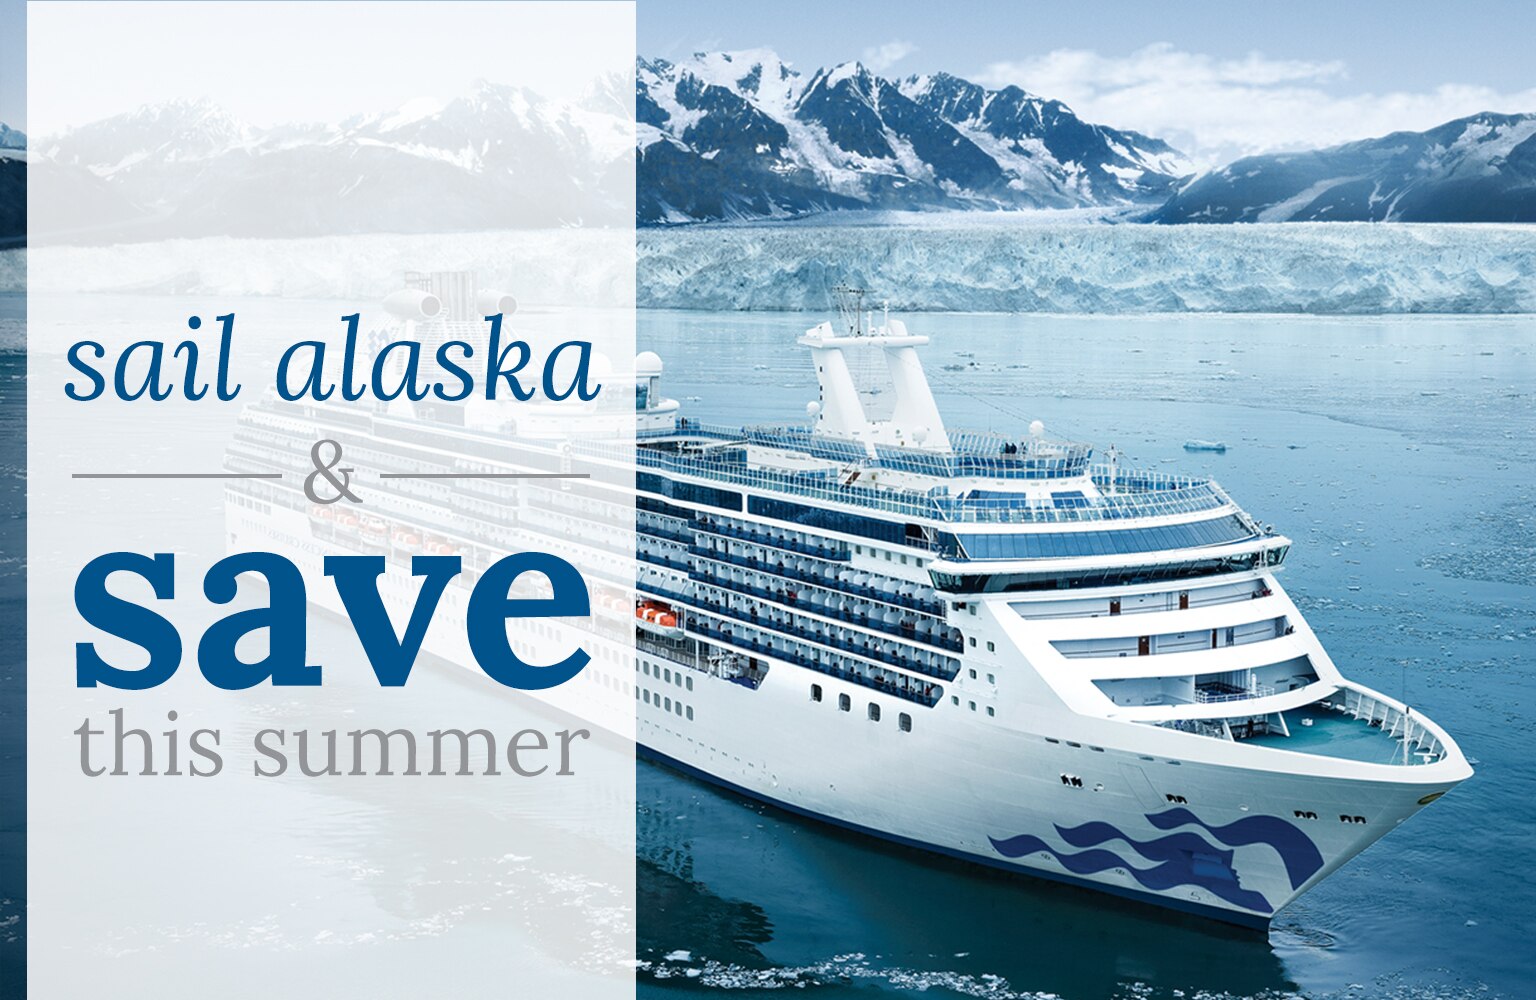 Image of Princess ship in Alaska with glaciers in background. Sail Alaska and save this summer, click to book now.